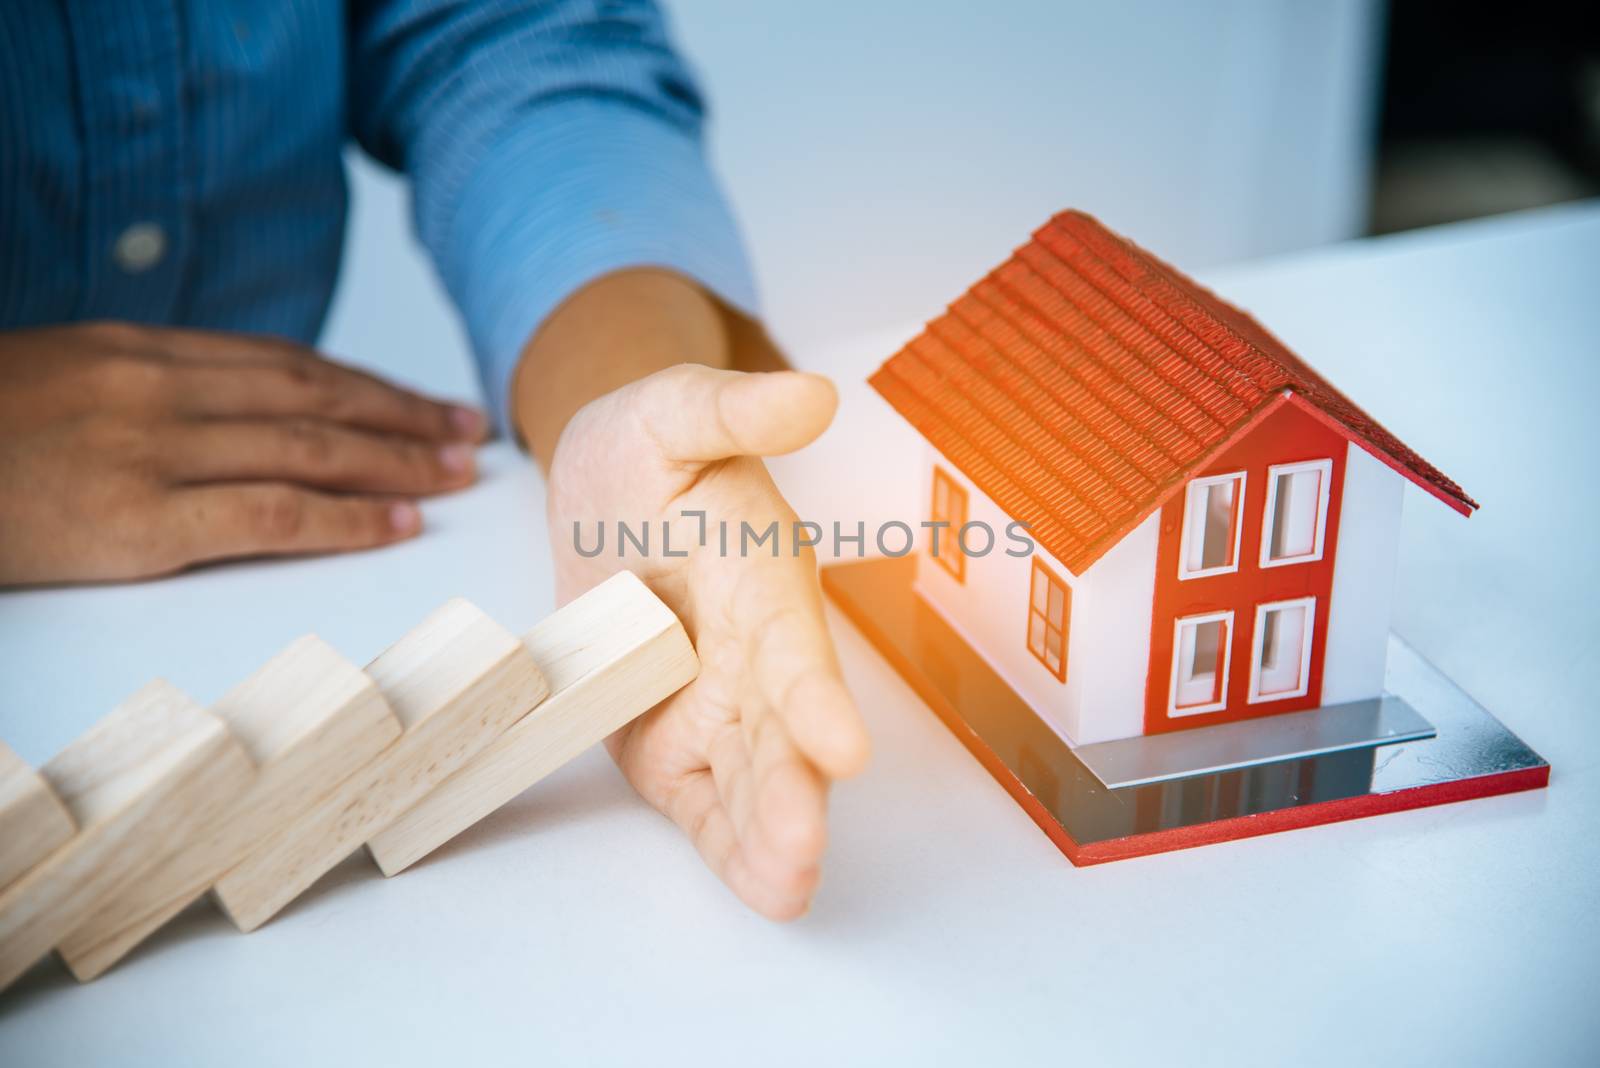  hand stopping risk the wooden blocks from falling on house, Hom by photobyphotoboy